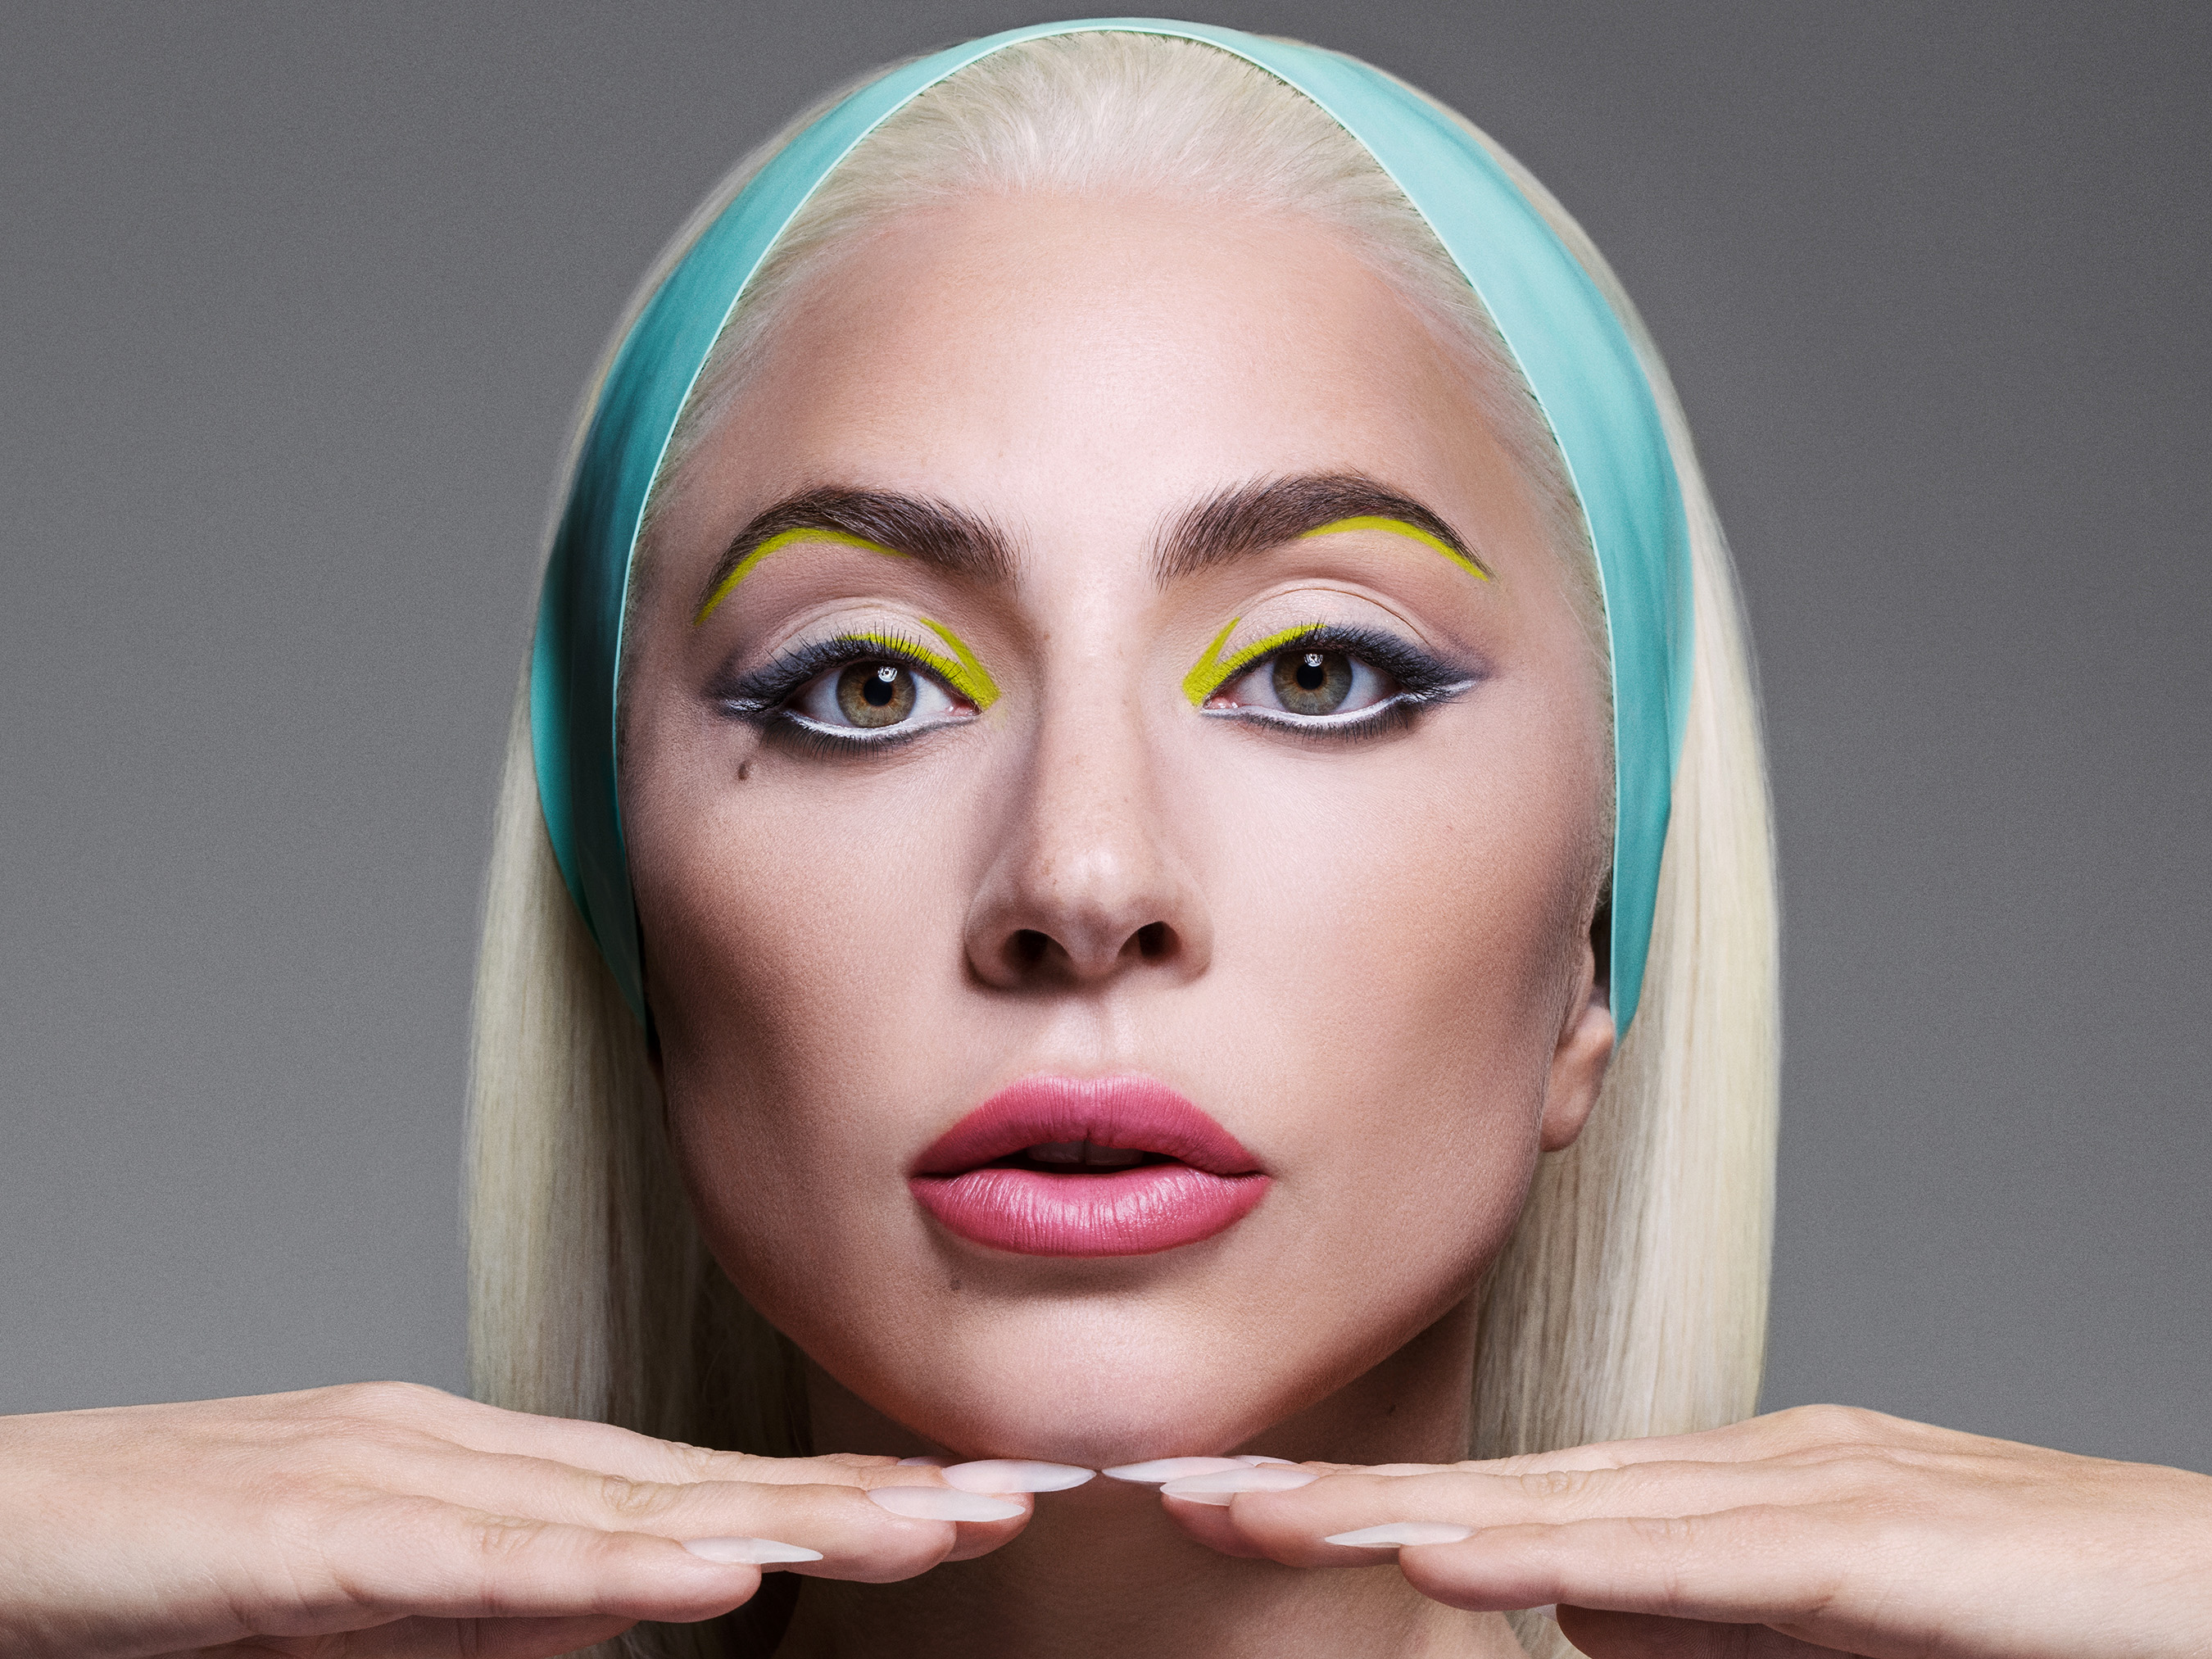 Haus Labs Founder Lady Gaga wearing Optic Intensity Eco Gel Eyeliners in Chartreuse Matte, Charcoal Matte and White Onyx Matte, and Le Monster Lip Crayon in Melon Matte. Shot By: Inez and Vinoodh